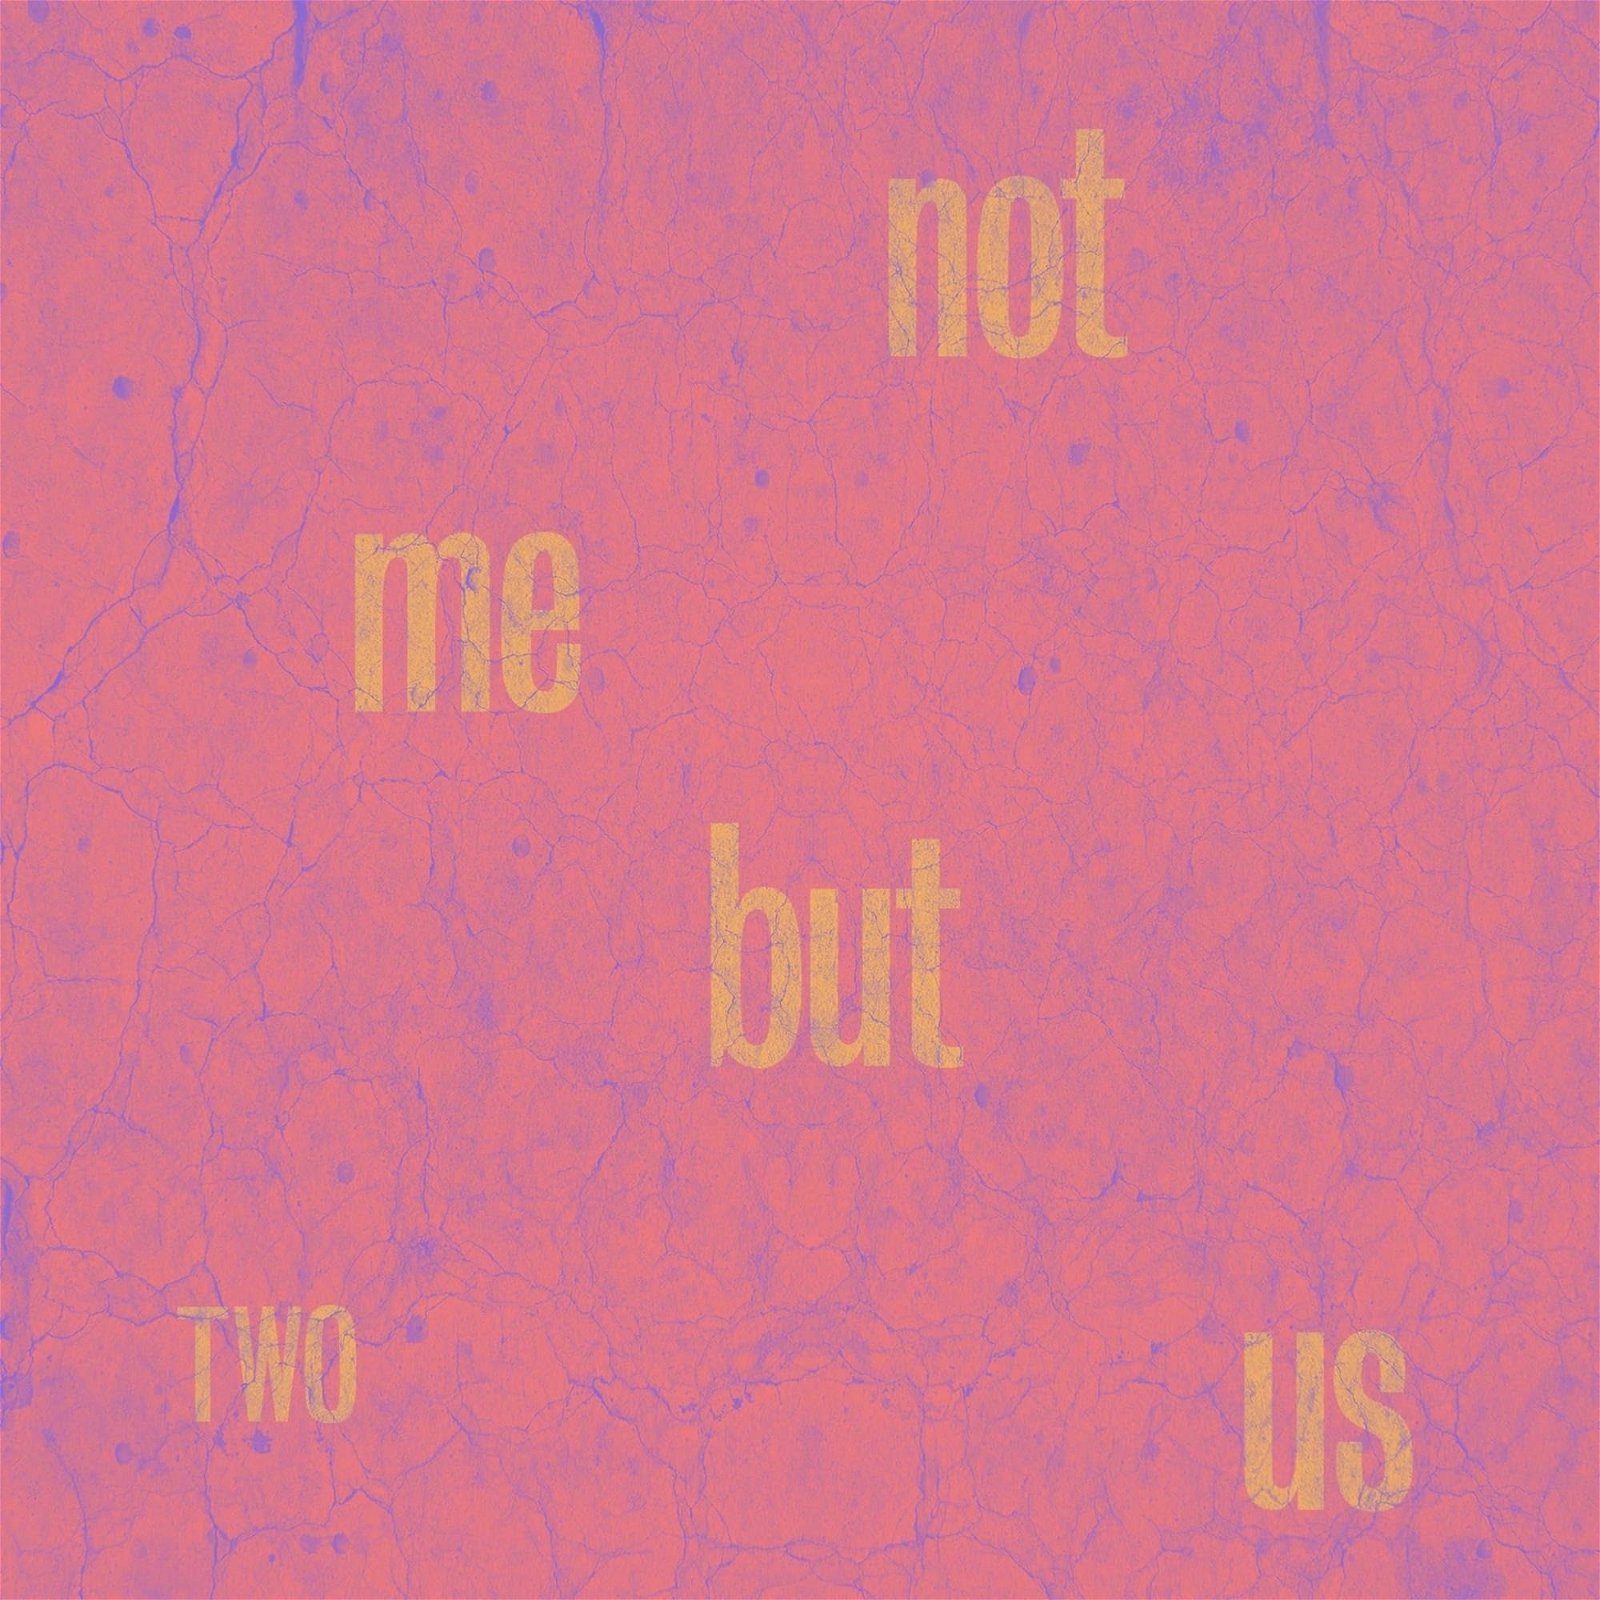 CD Shop - NOT ME BUT US TWO